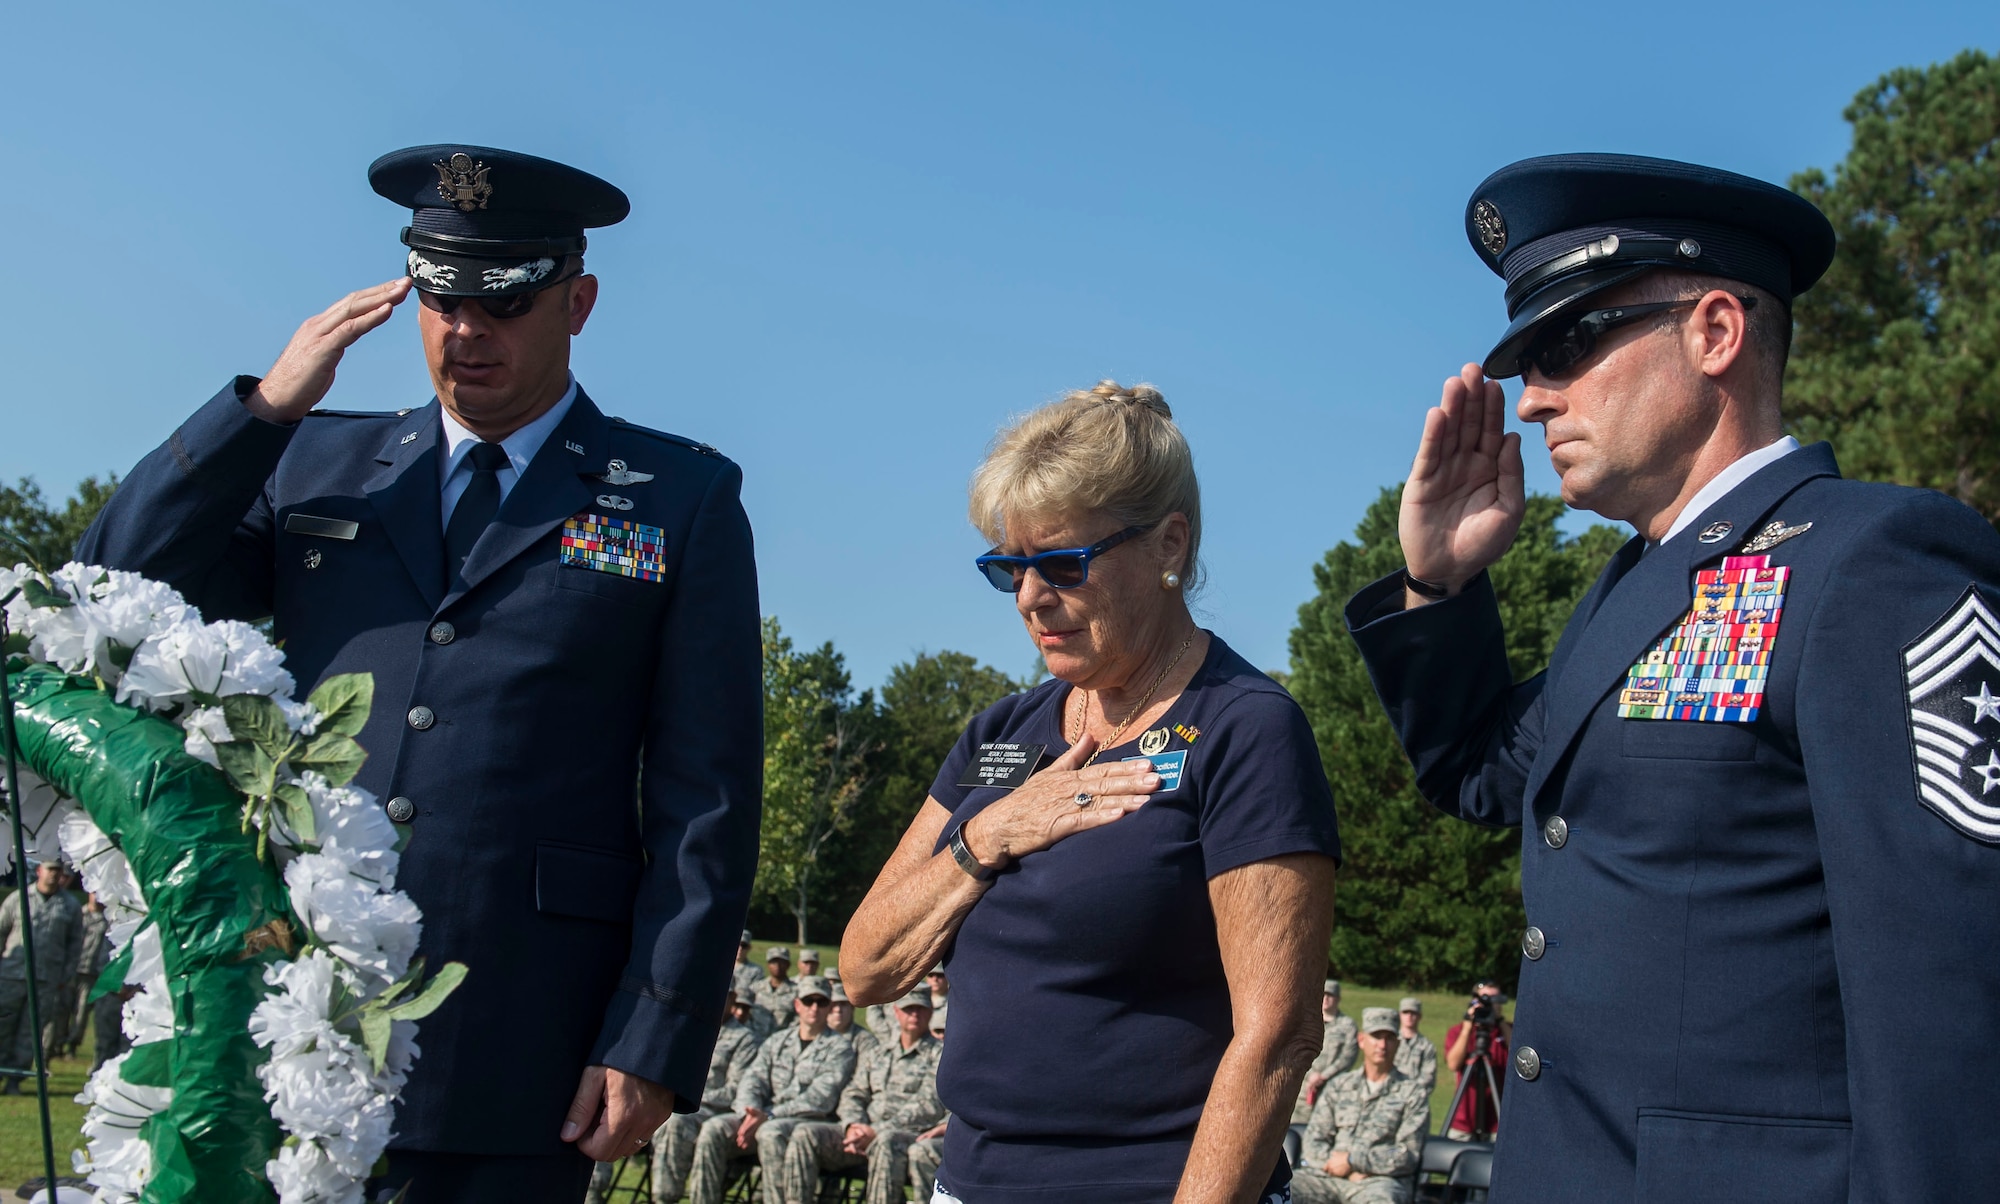 From left, U.S. Air Force Col. Ryan Inman, 20th Fighter Wing (FW) vice commander, Susan Stephens, POW/MIA ceremony guest speaker, and Chief Master Sgt. Daniel Hoglund, 20th FW command chief, render honors during a ceremony at Shaw Air Force Base, S.C., Sept. 21, 2018.